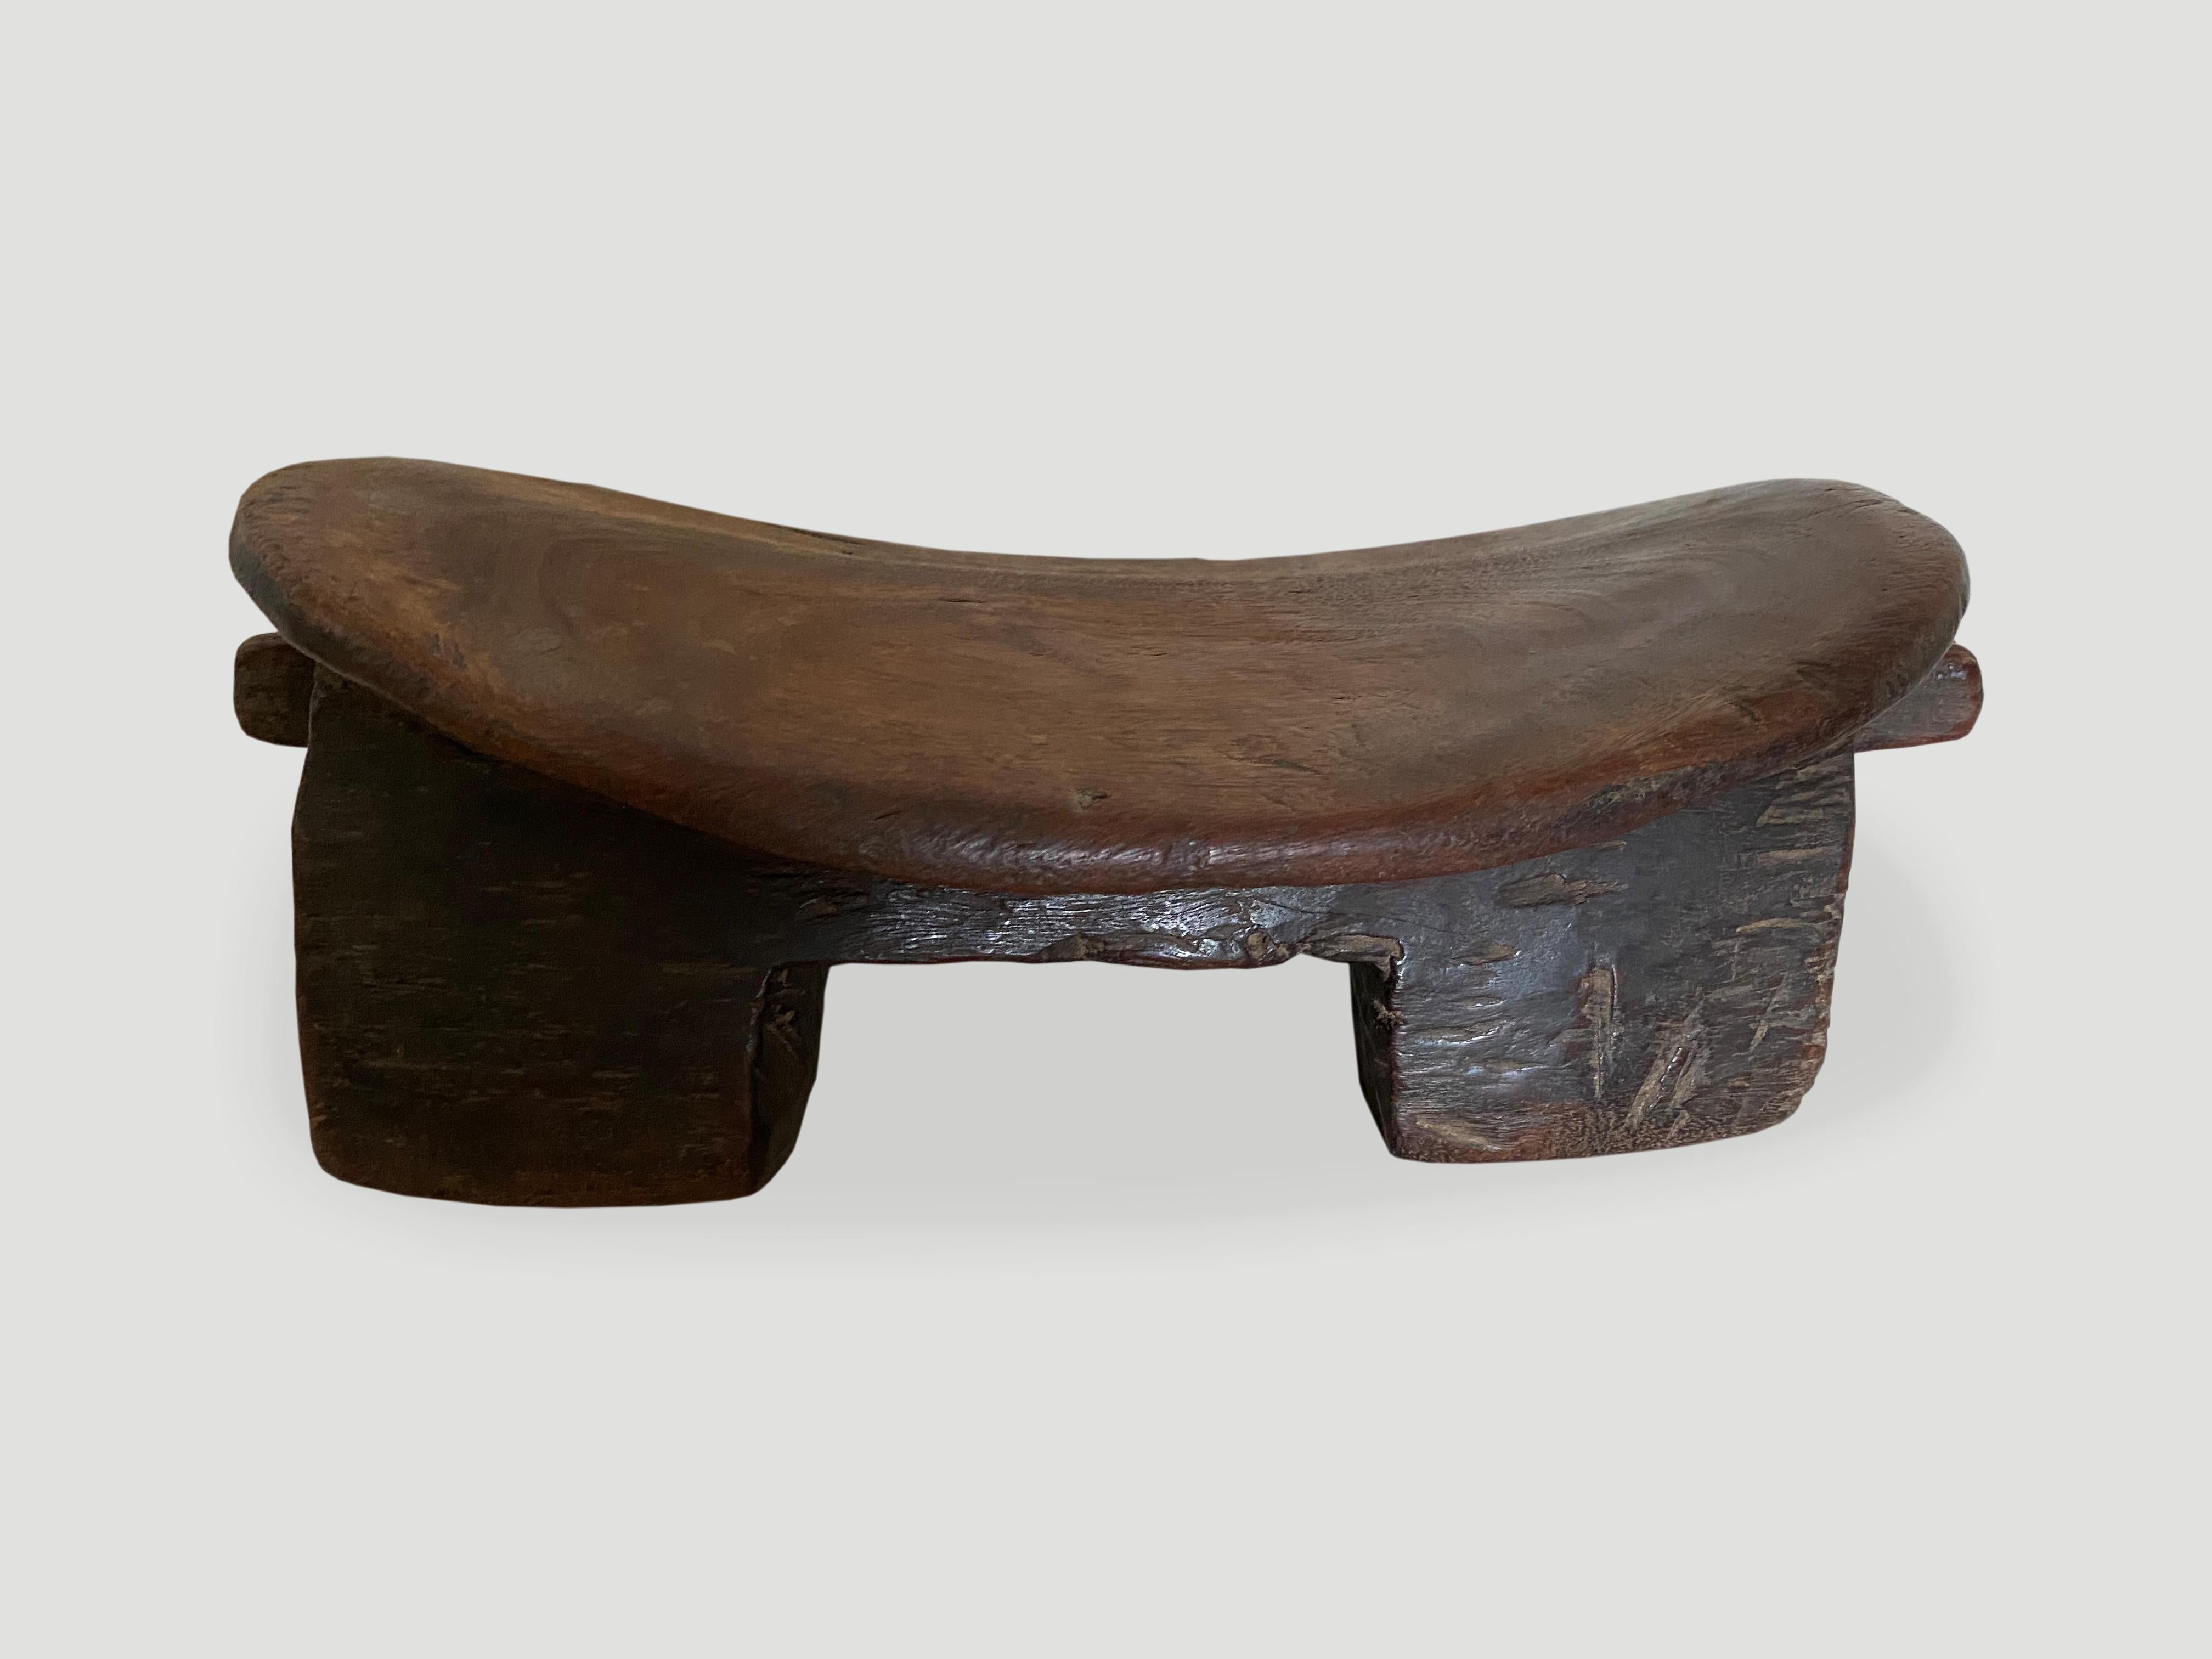 Andrianna Shamaris Antique African Wooden Stool In Excellent Condition For Sale In New York, NY